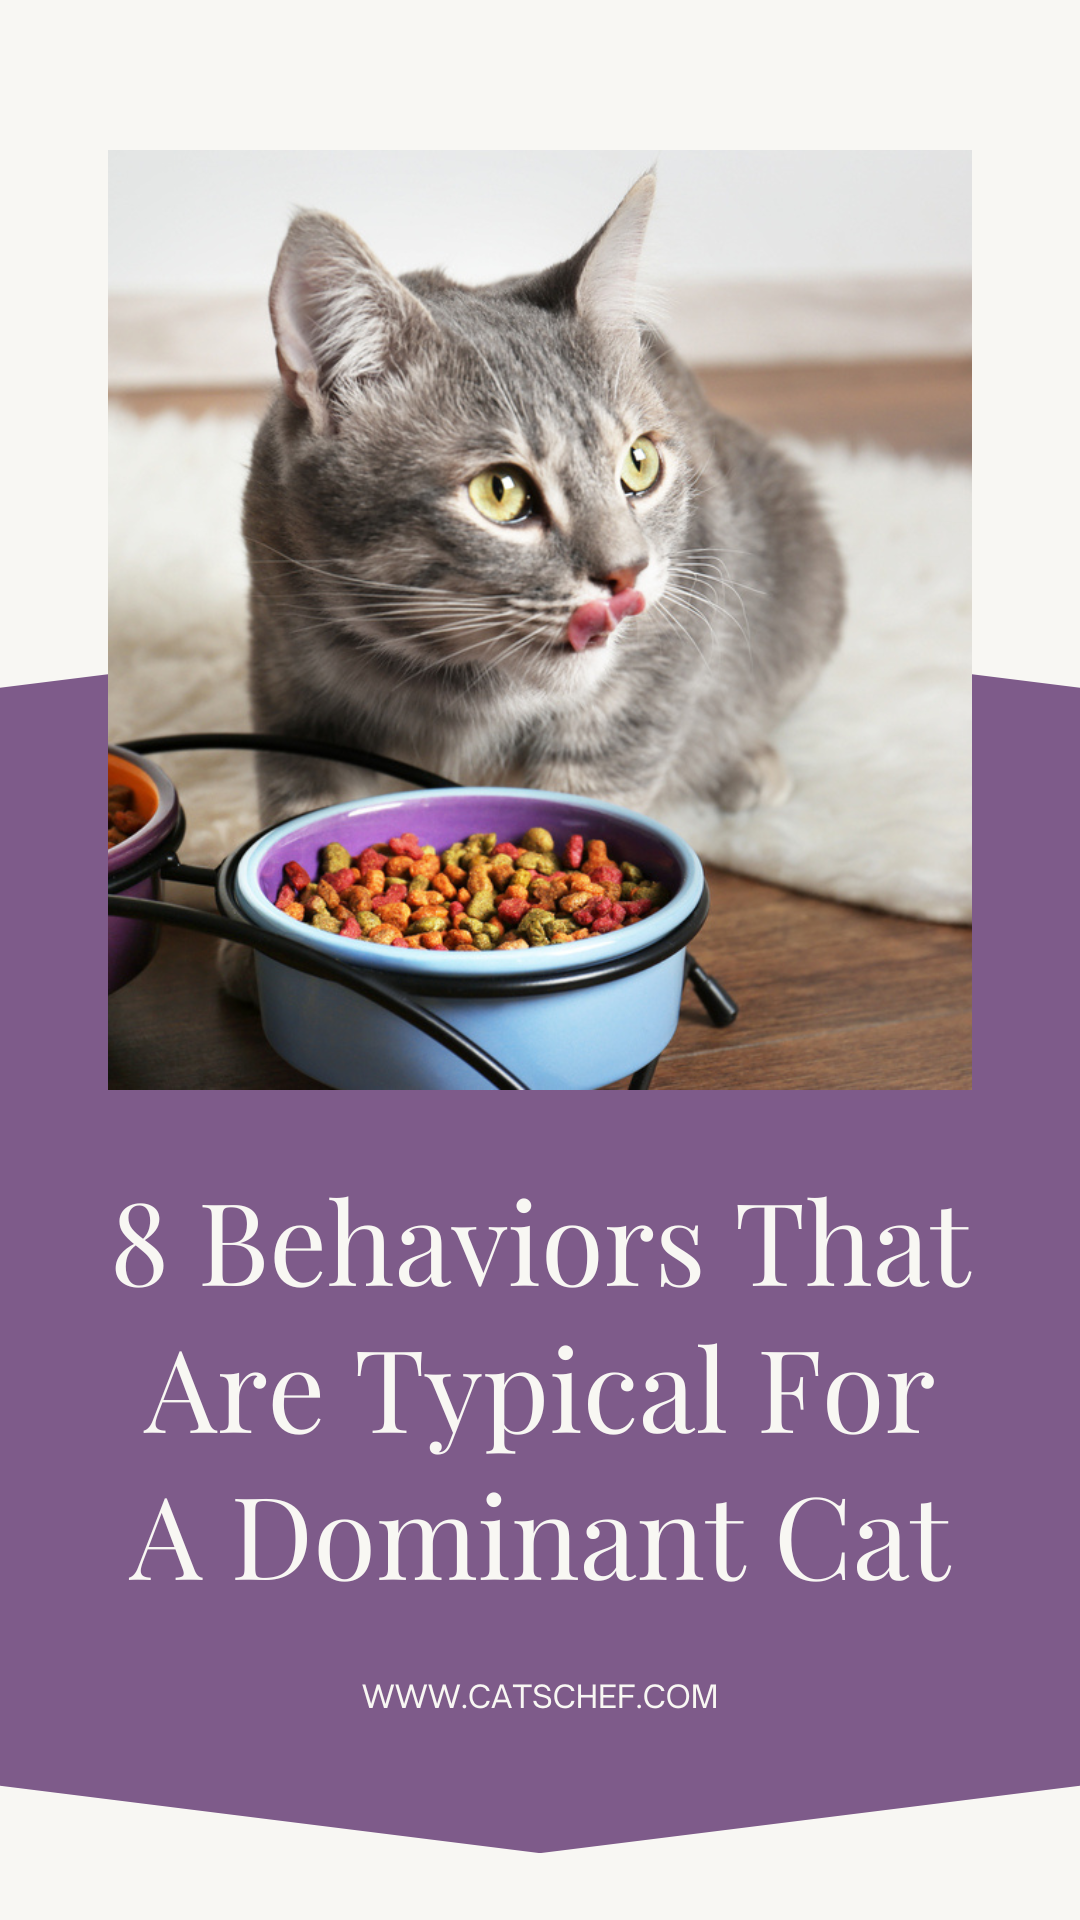 8 Behaviors That Are Typical For A Dominant Cat